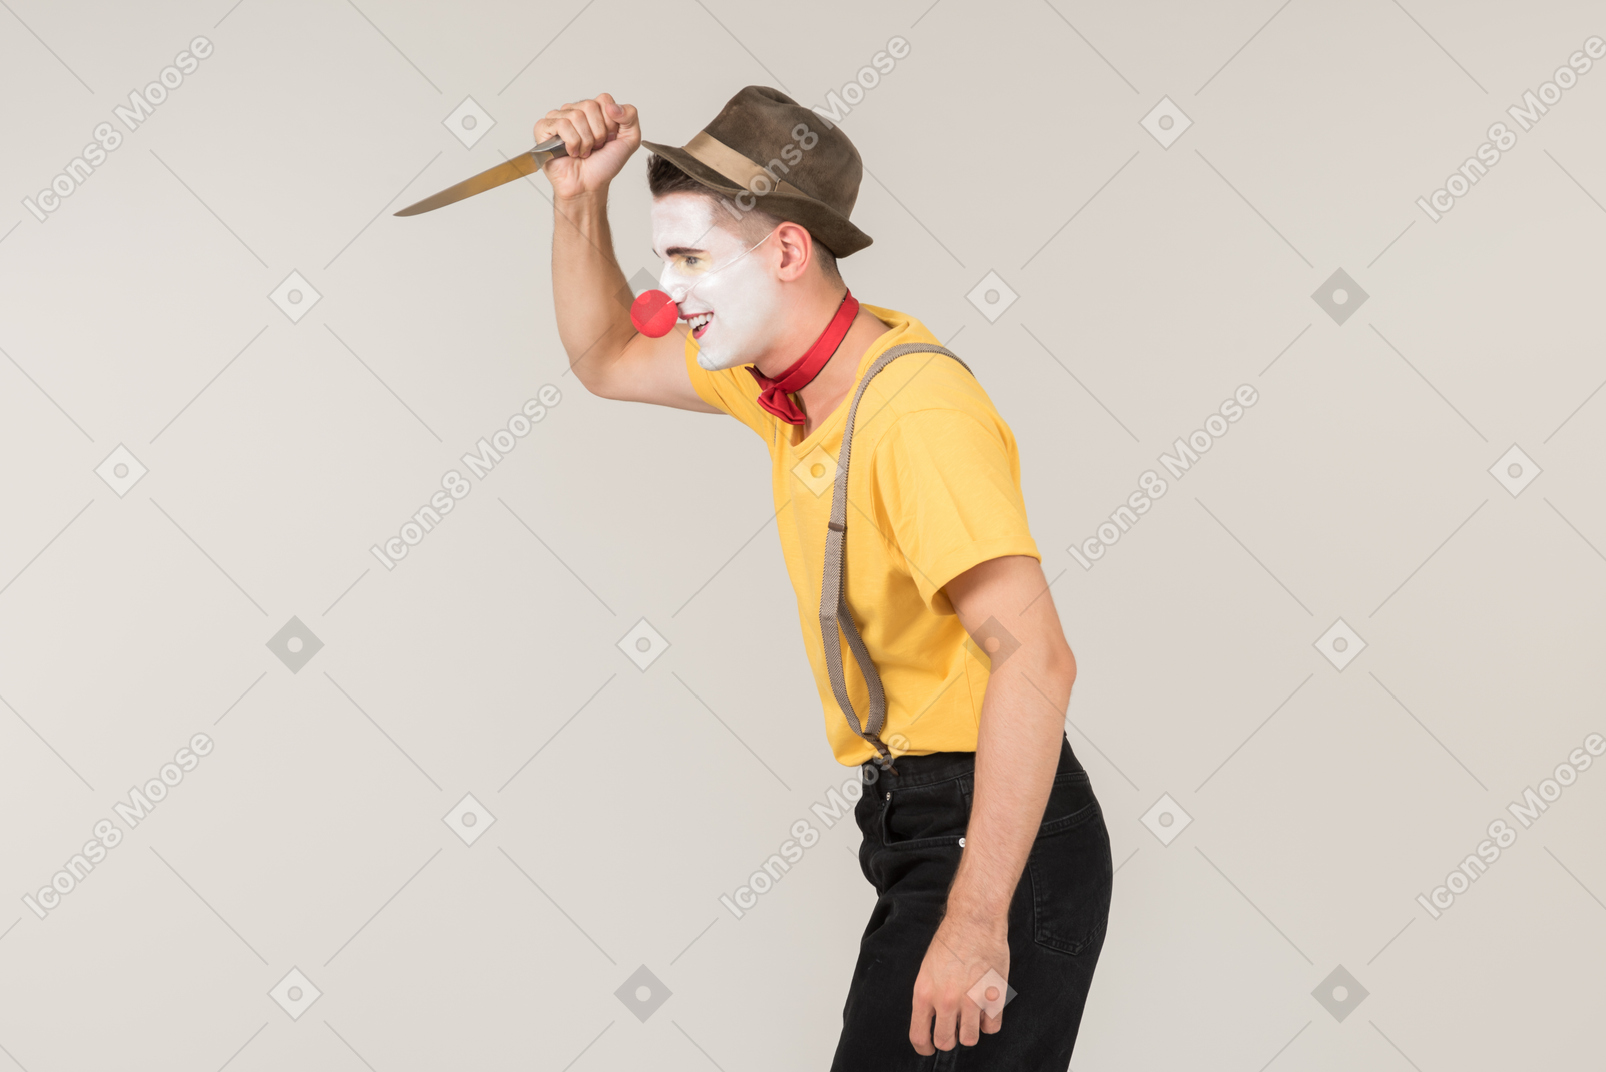 Male clown standing in profile and holding a knife